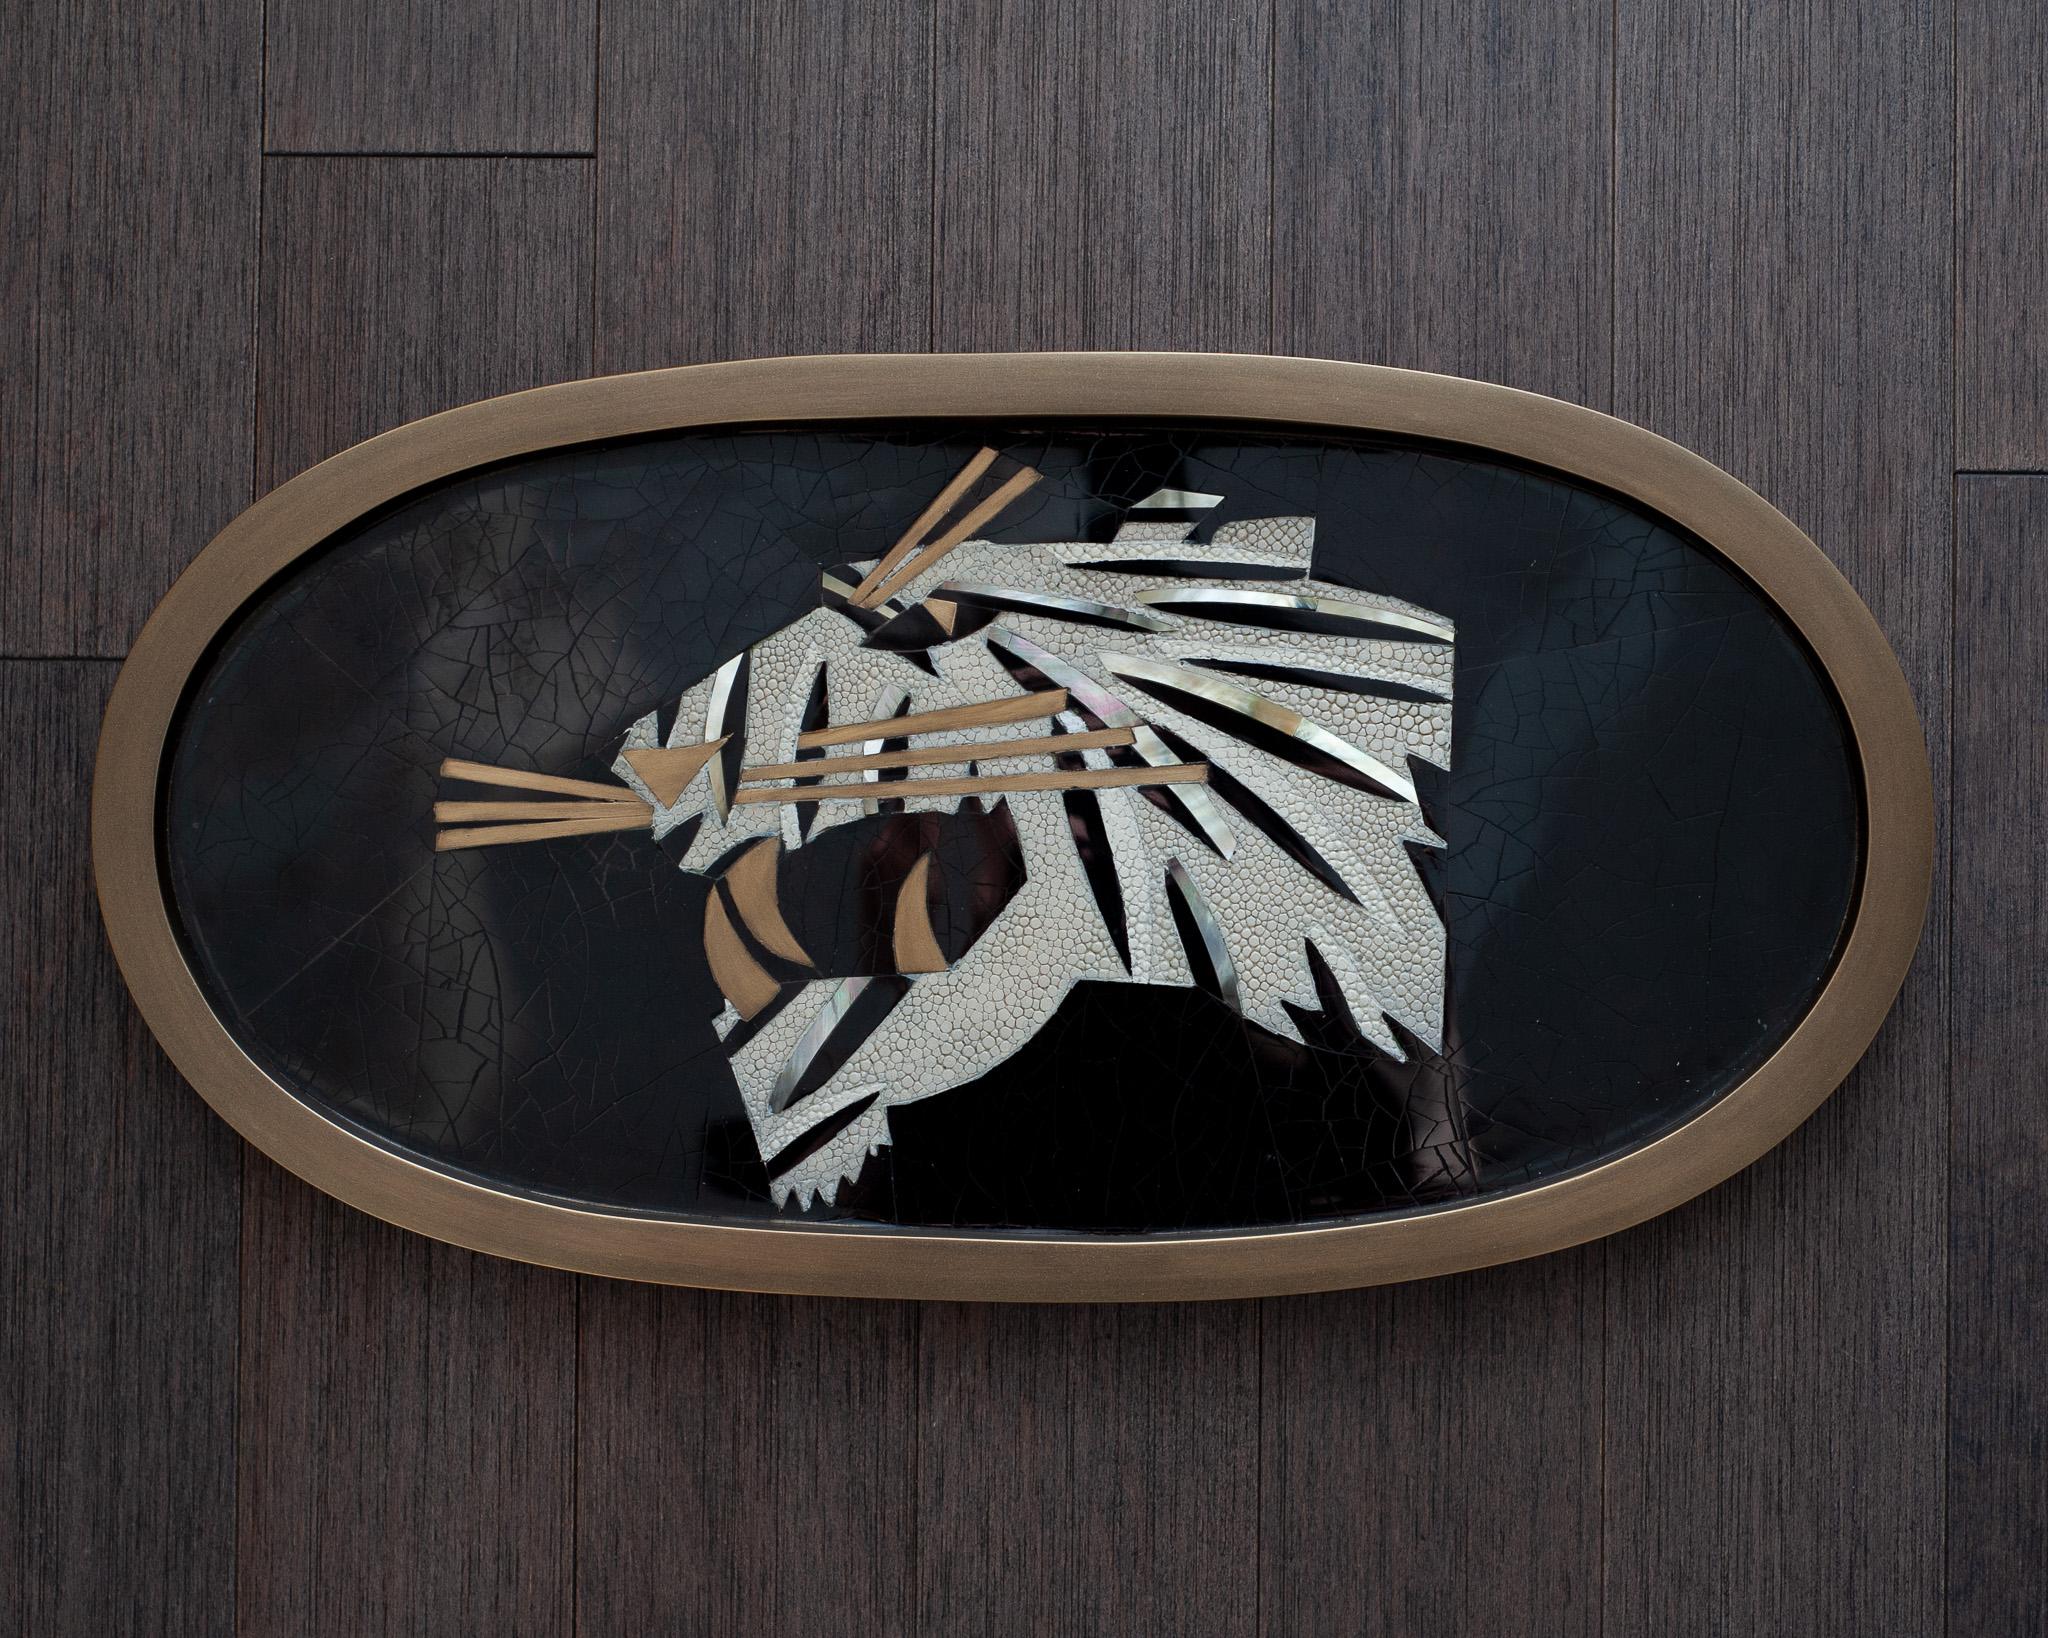 In stock now - A stunning and beautifully crafted Kifu Paris panther serving tray, with brass, creme shagreen, mother of pearl, and black penshell inlay, over a base of walnut and covered in leather on the bottom. Expertly crafted, this tray is a